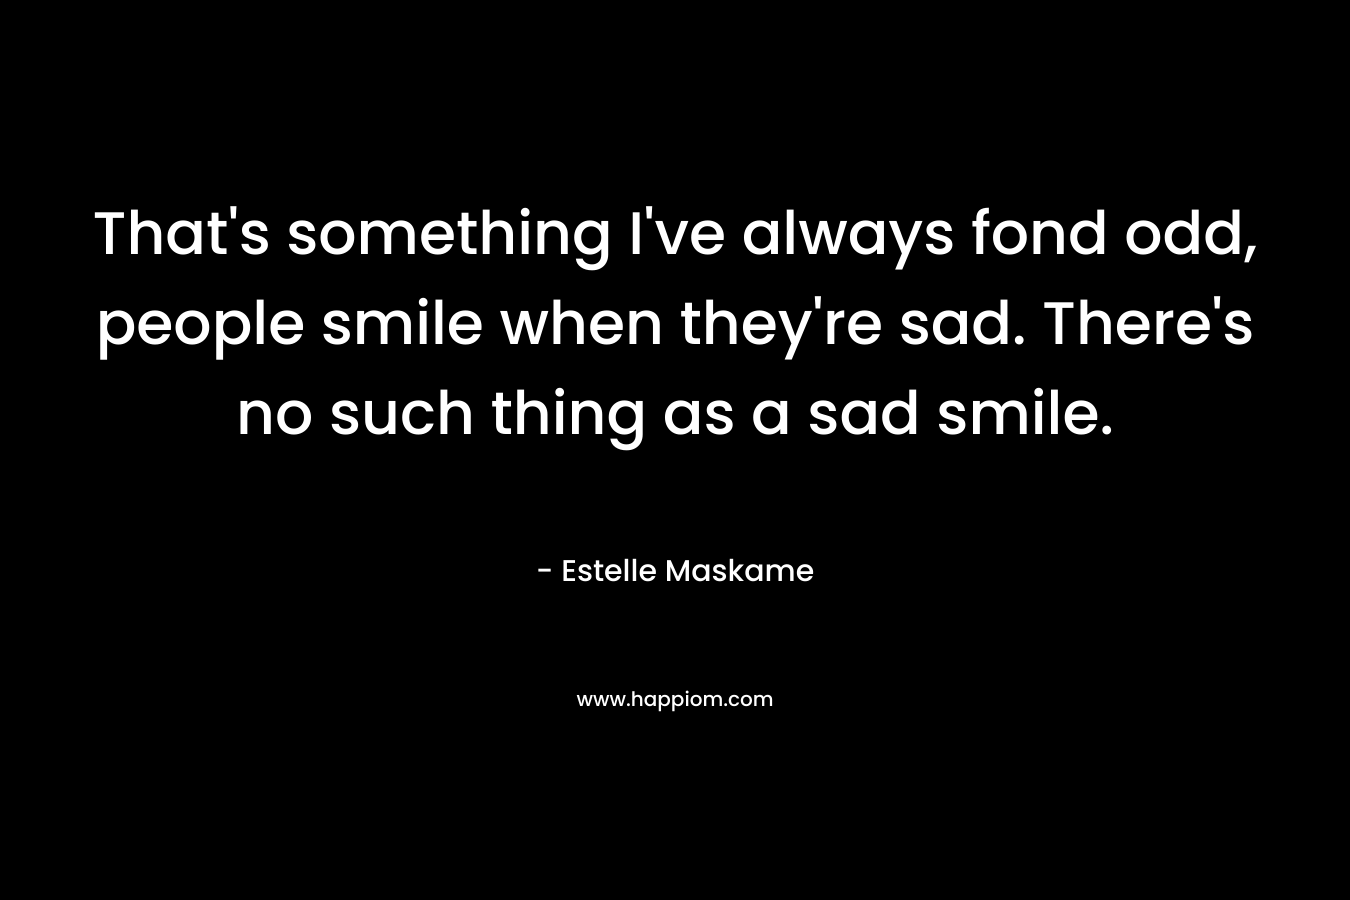 That’s something I’ve always fond odd, people smile when they’re sad. There’s no such thing as a sad smile. – Estelle Maskame